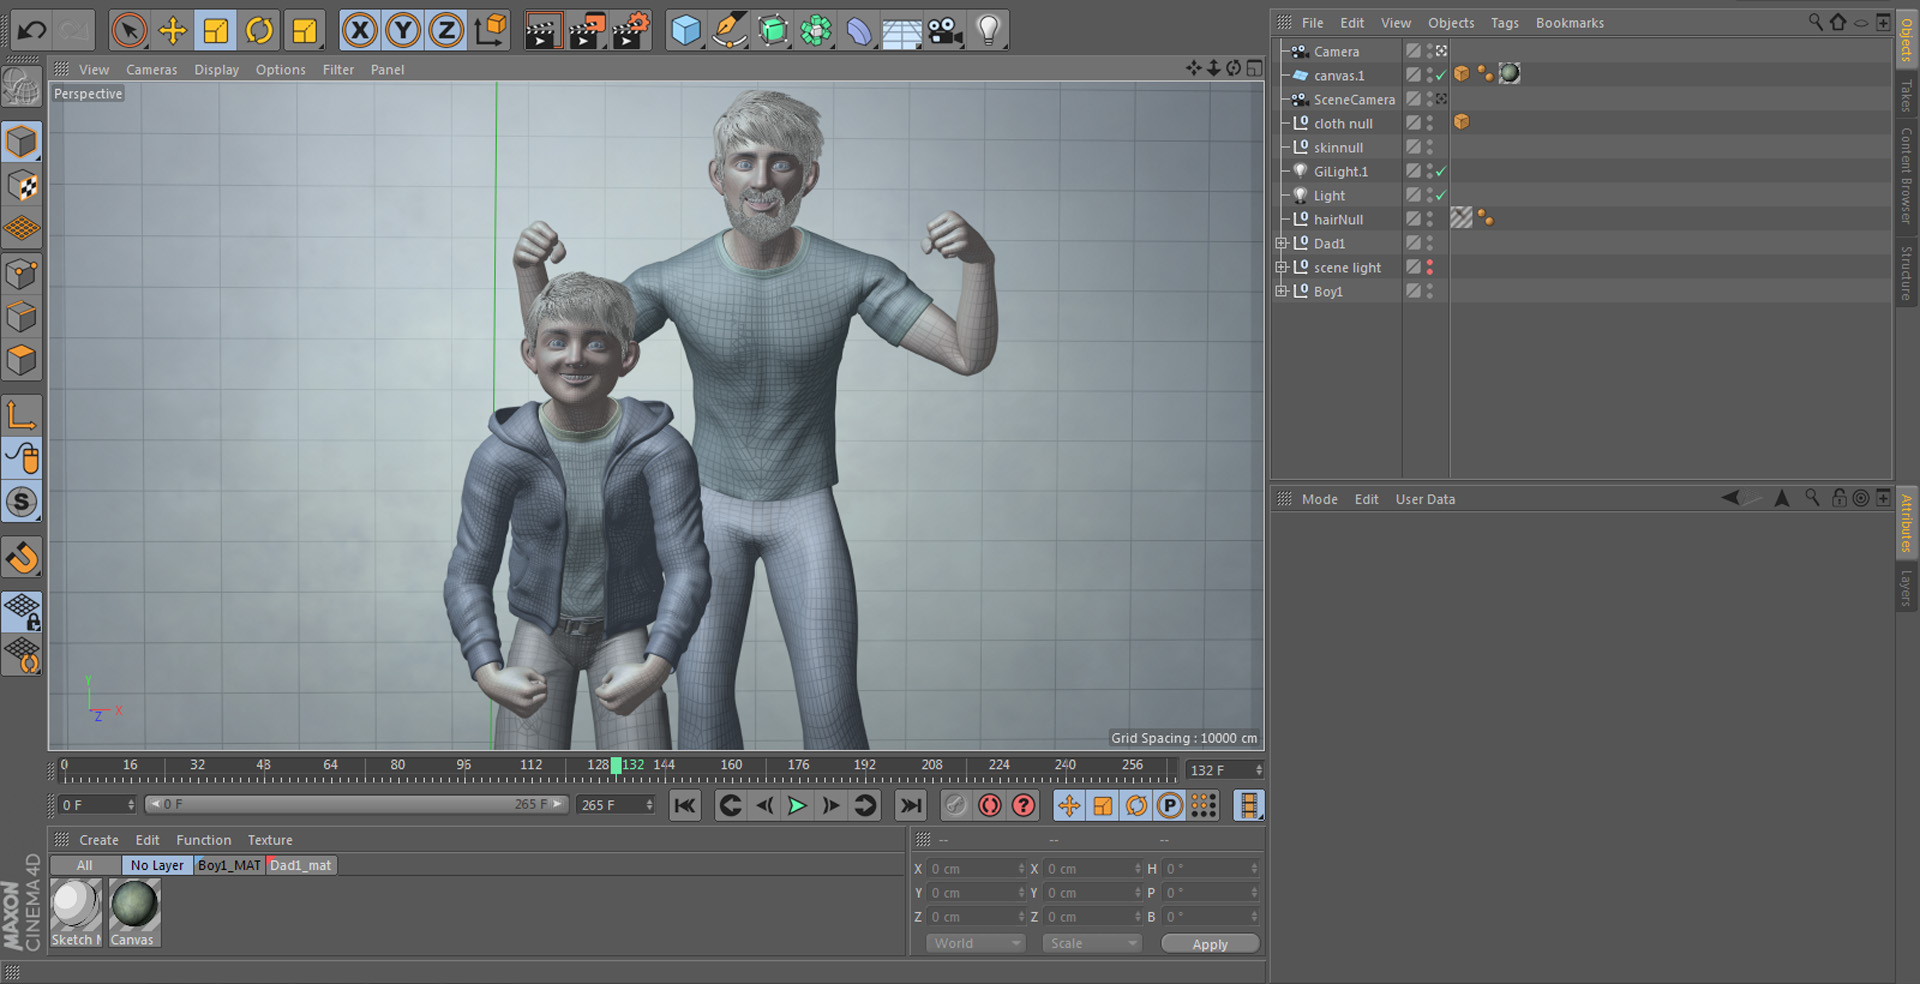 Hair was generated as meshes in order to render C4D hair with a Sketch & Toon look properly.